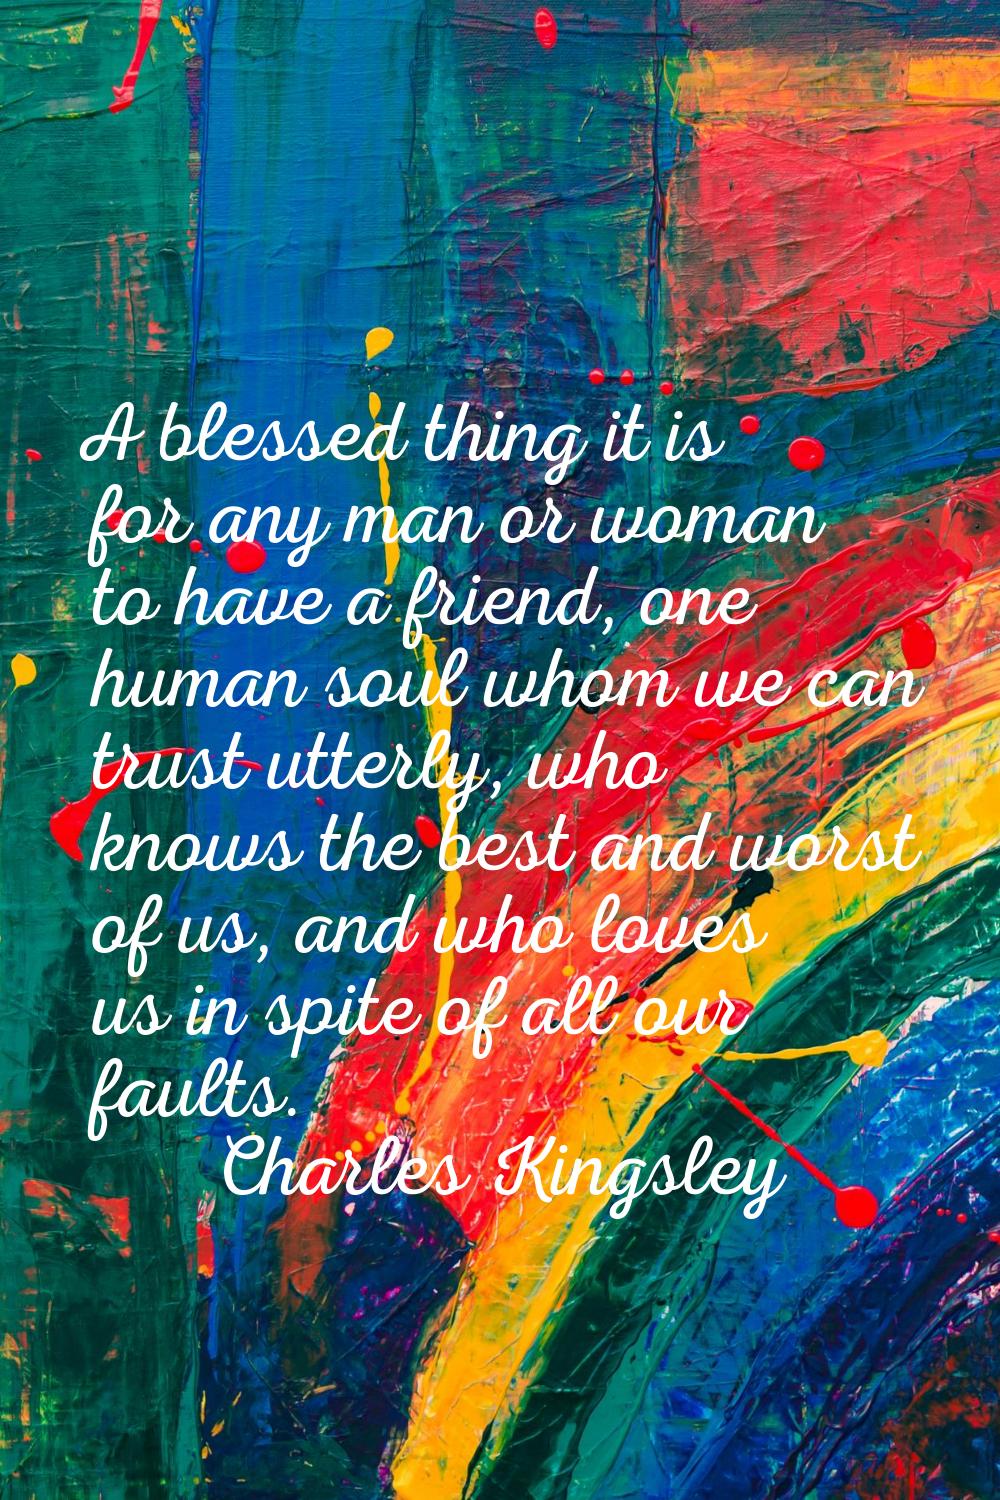 A blessed thing it is for any man or woman to have a friend, one human soul whom we can trust utter